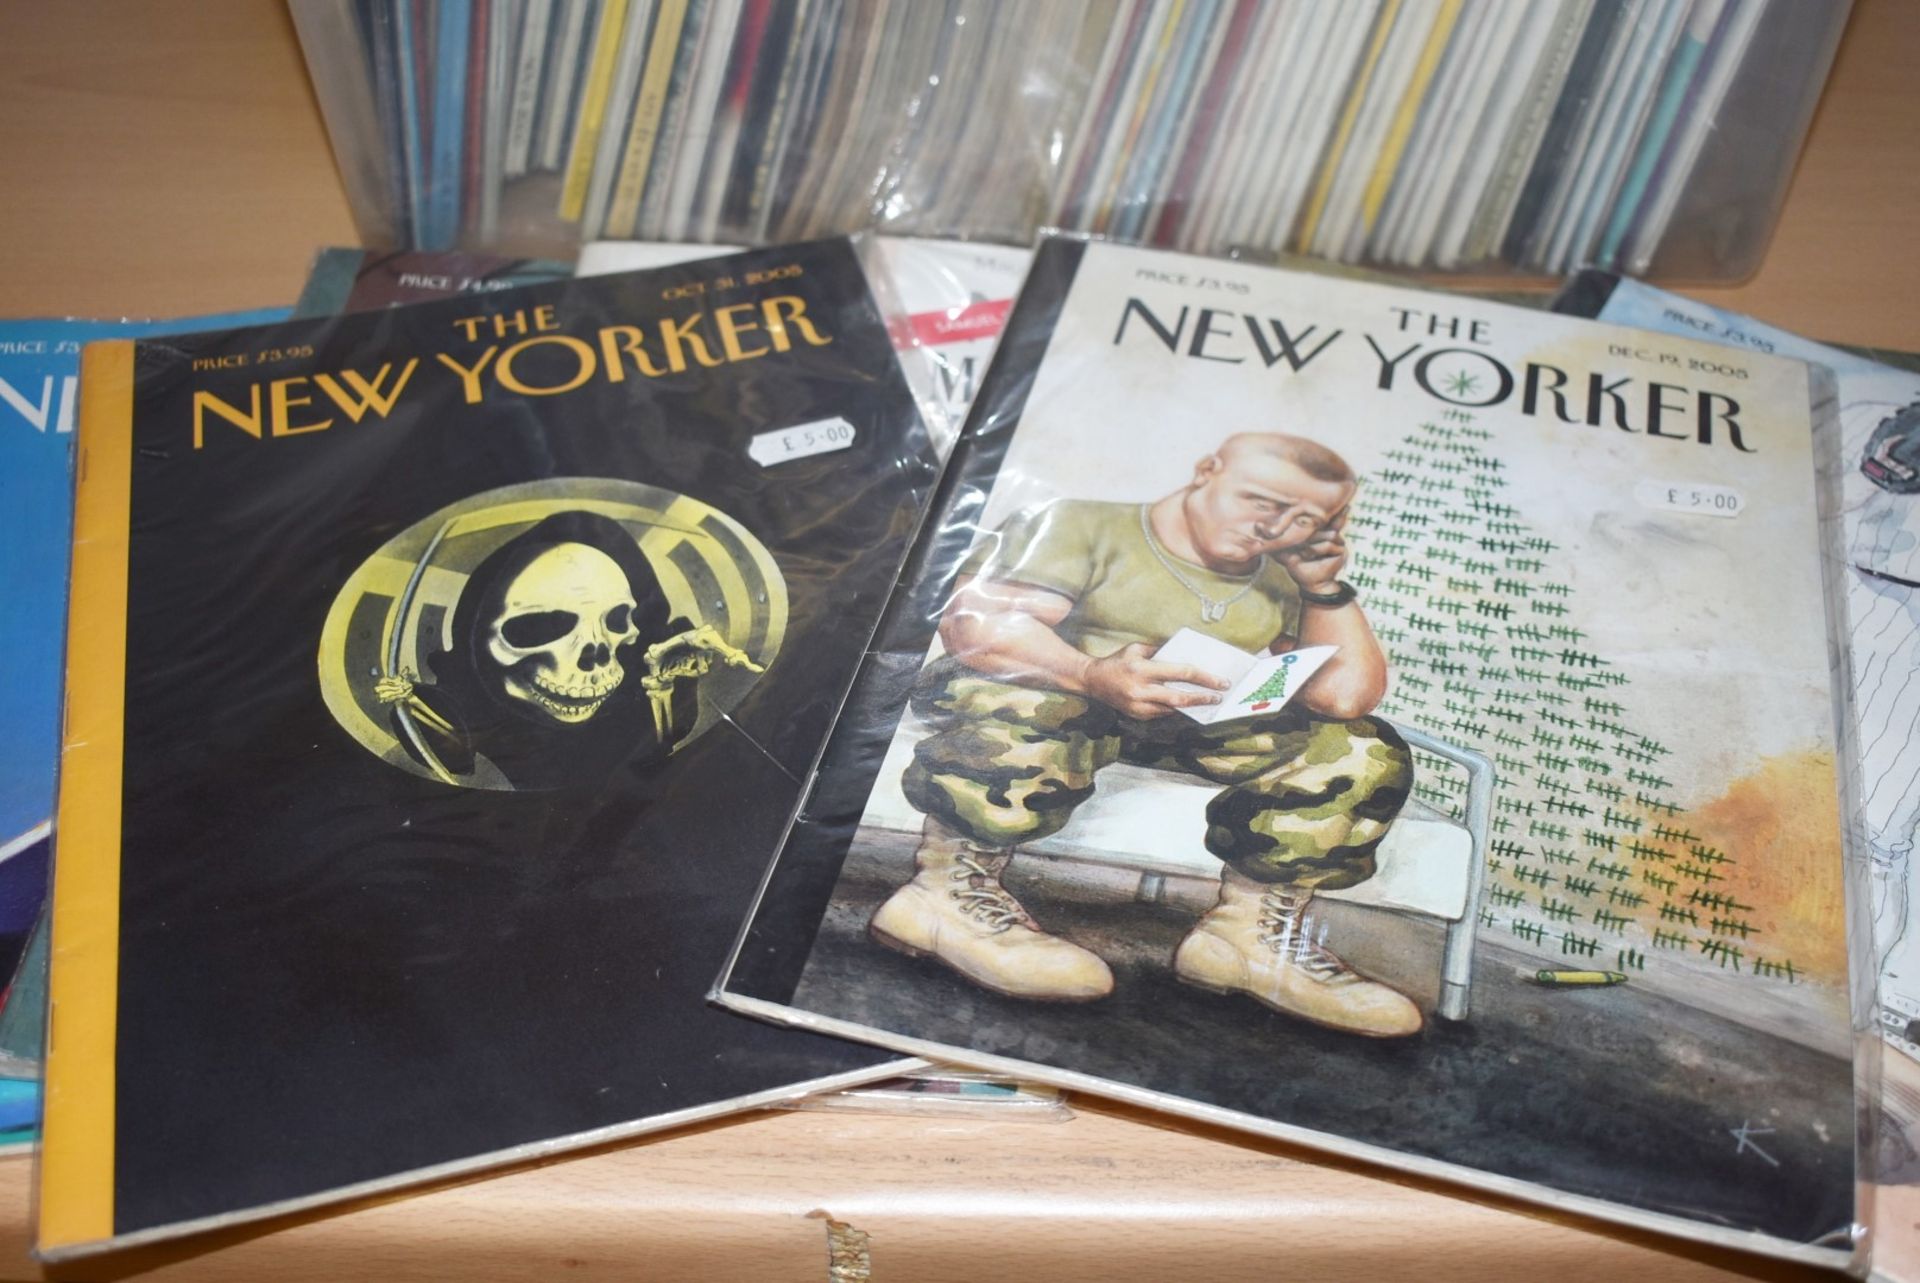 112 x New Yorker Magazines Dated 1997 to 2006 - Ref MB121 - CL431 - Location: Altrincham WA14 - Image 2 of 4